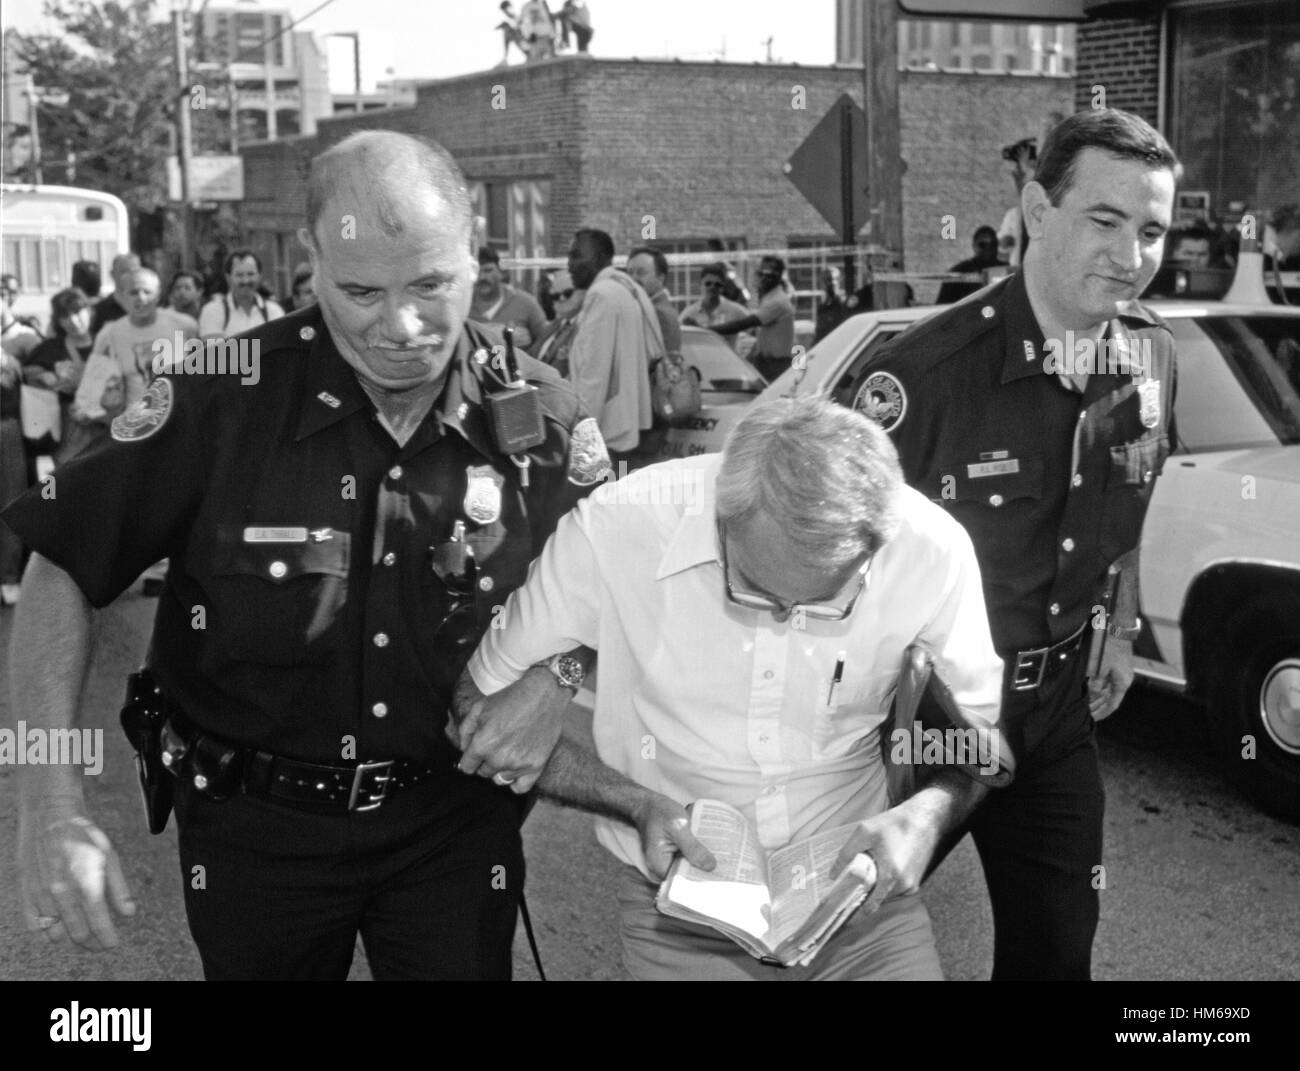 Police arrest a man with his Bible as he is arrested after demonstrating outside an abortion clinic Stock Photo